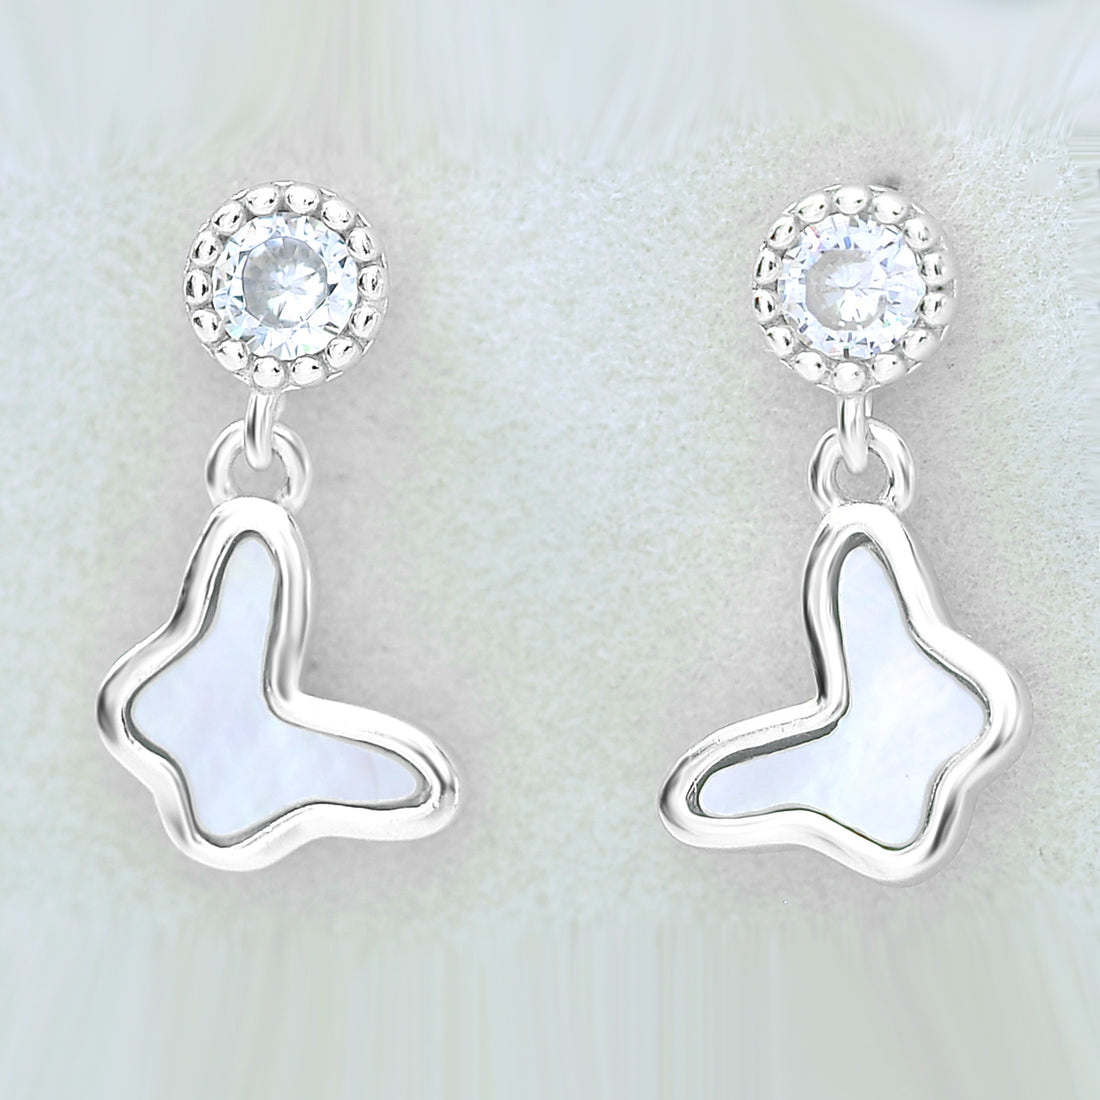 Charm Butterfly Mother of Pearl Stud Earring - Elegant 925 Silver with Sparkling Cubic Zircons